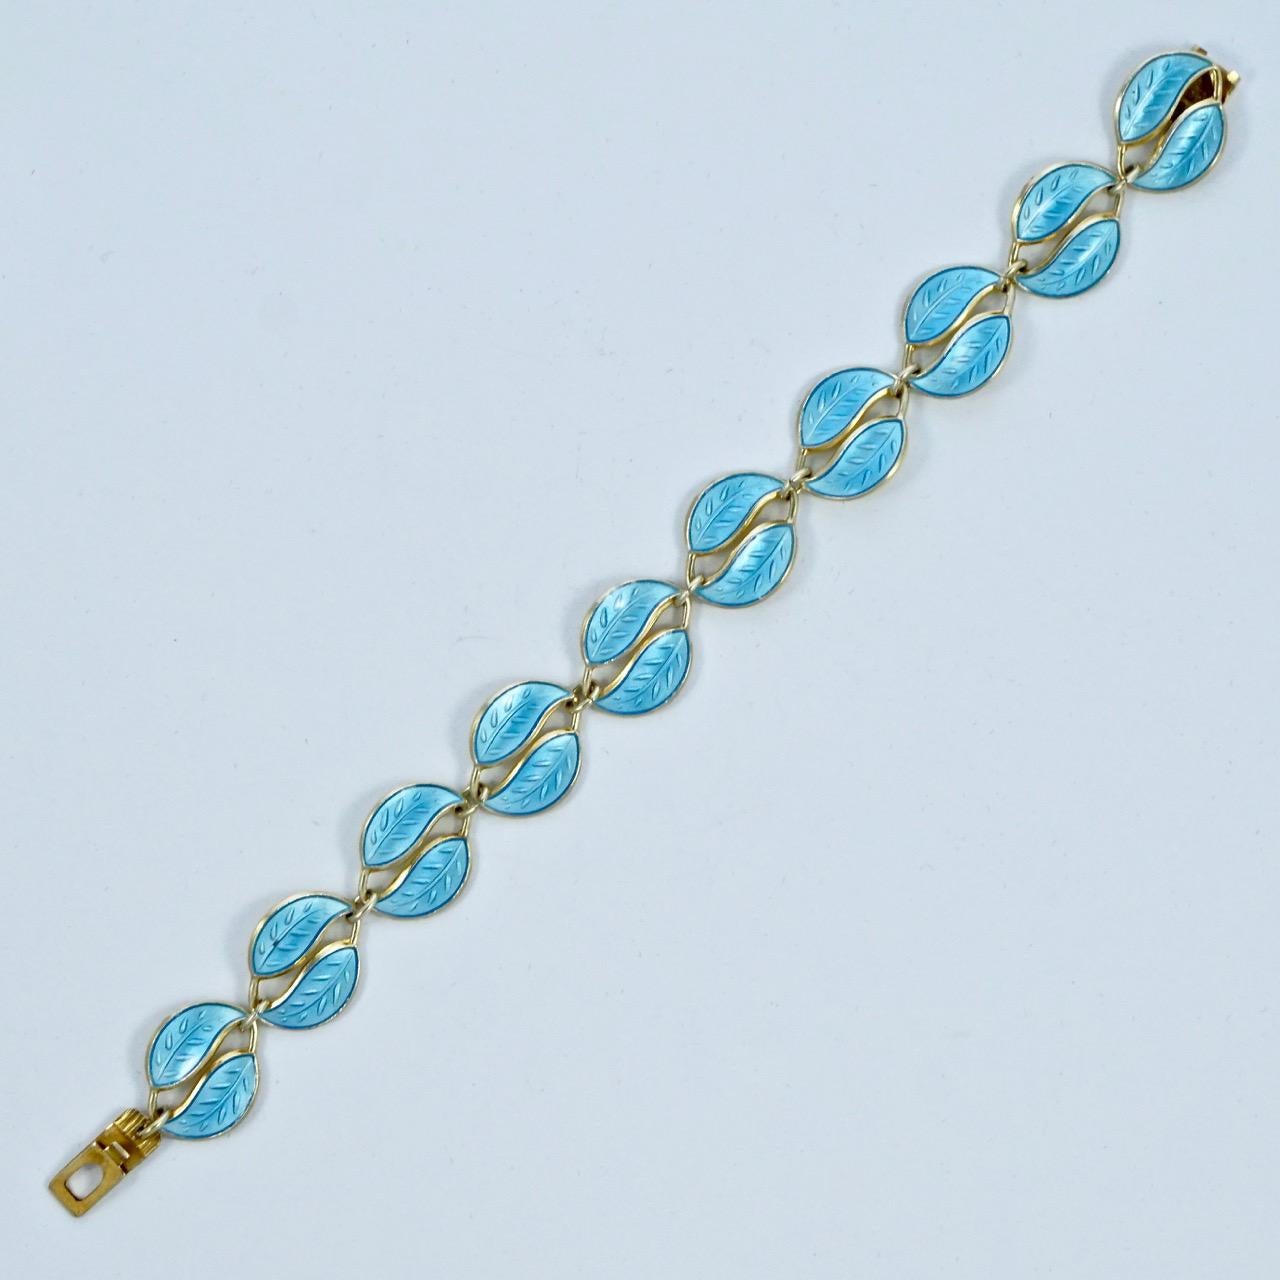 David Andersen Norway gold plated sterling silver detailed double leaf bracelet, with lovely sky blue enamel. Measuring length 17.8cm / 7 inches by width 1.3cm / .5 inch. The bracelet is in very good condition.

This is a beautiful sky blue enamel